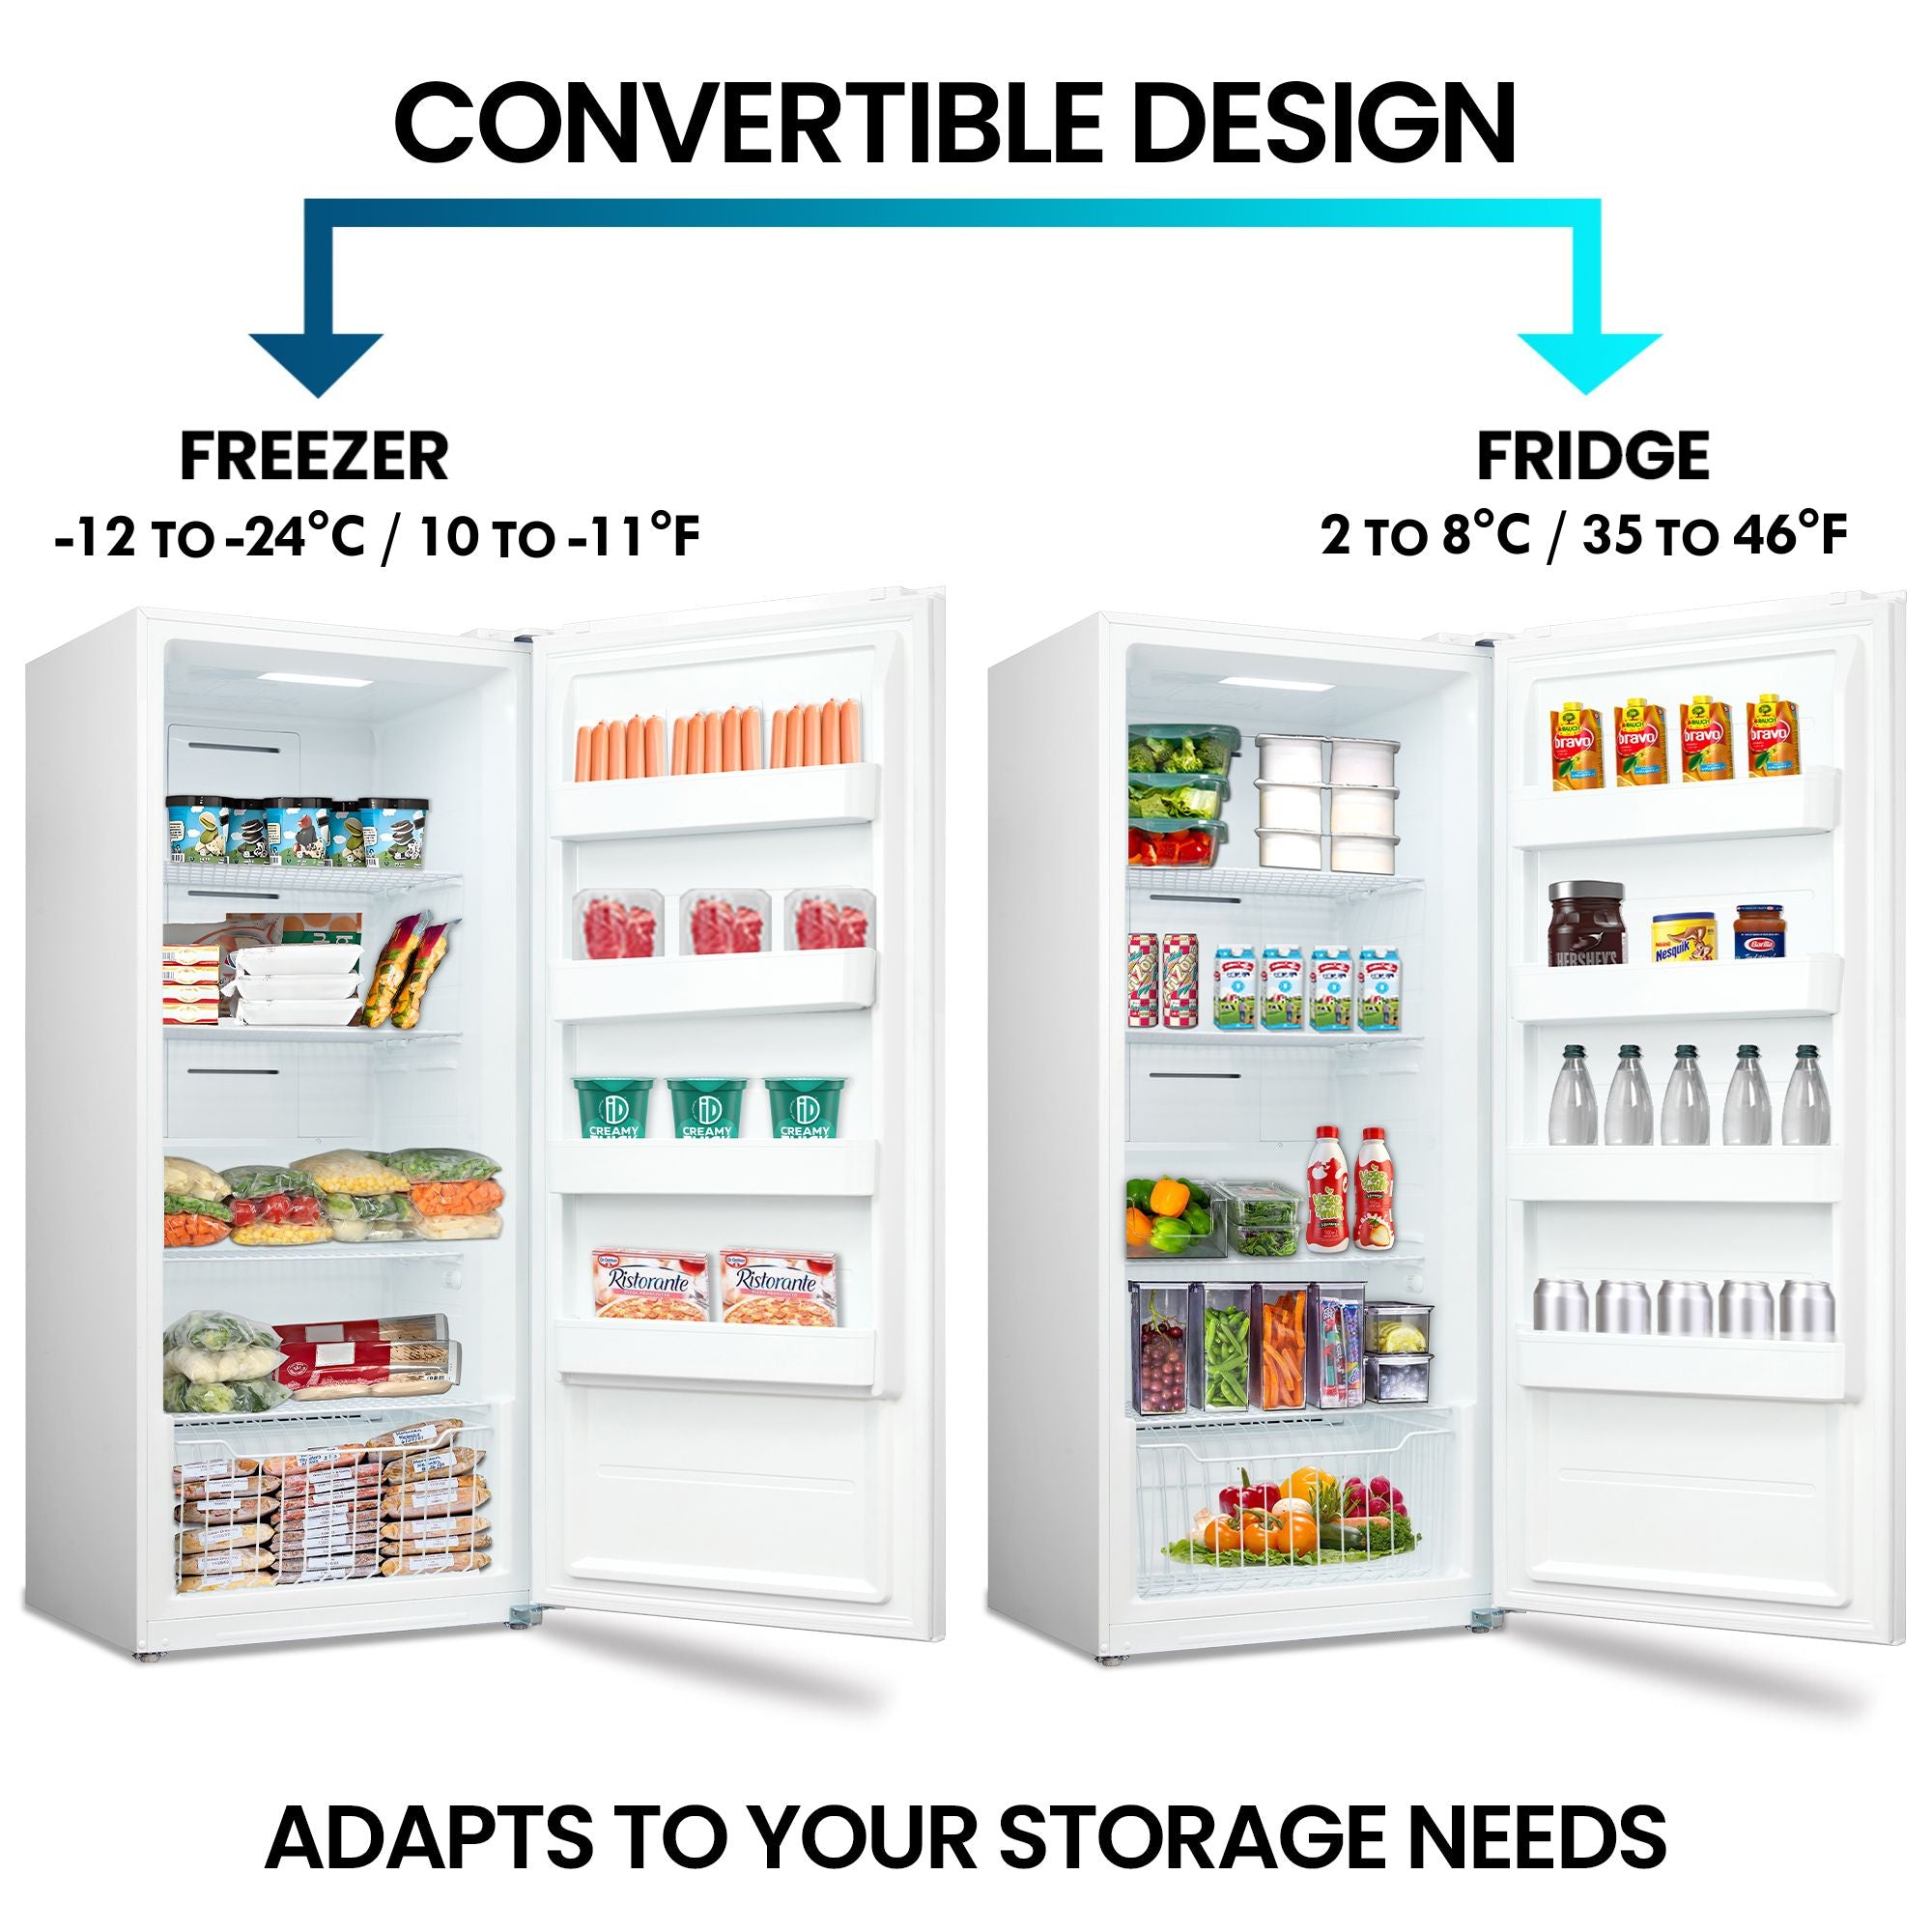 Two pictures show the Kenmore upright convertible open and filled with food items being used as a freezer and a refrigerator. Text above reads, "Convertible design: Freezer -12 to -24°C / 10 to -11°F; Fridge 2 to 8°C/ 35 to 46°F," and text below reads, "Adapts to your storage needs."